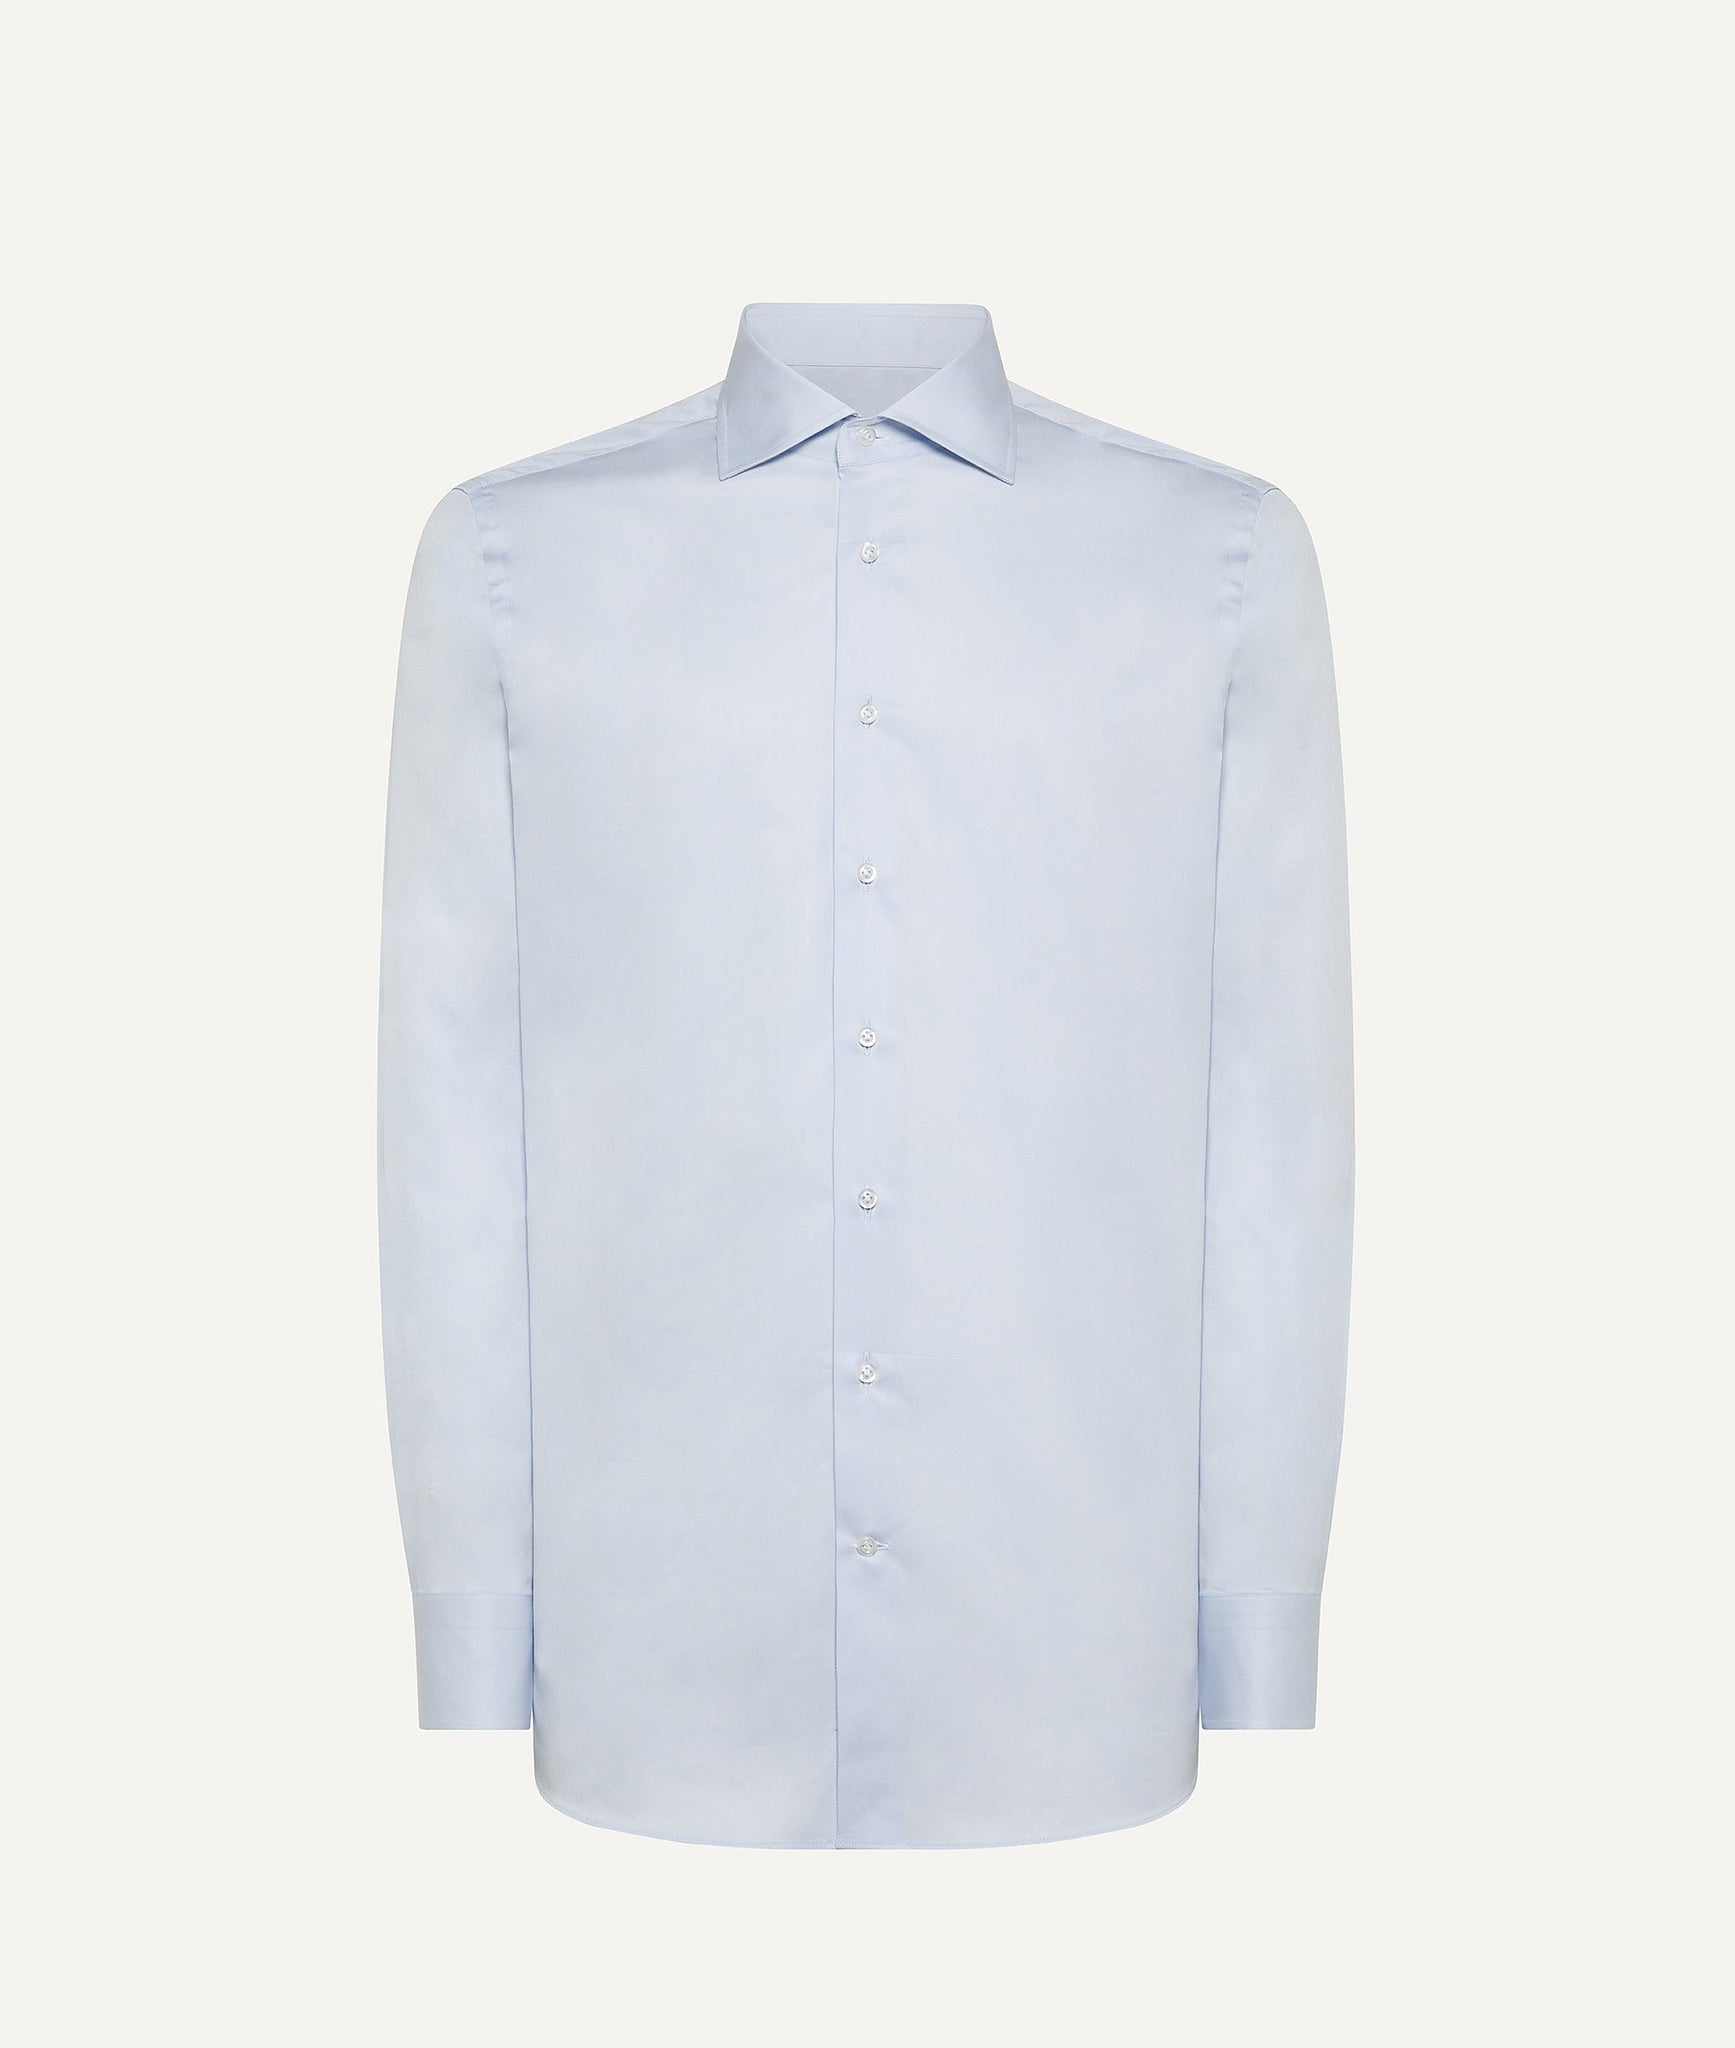 Classic Twill Shirt in Cotton